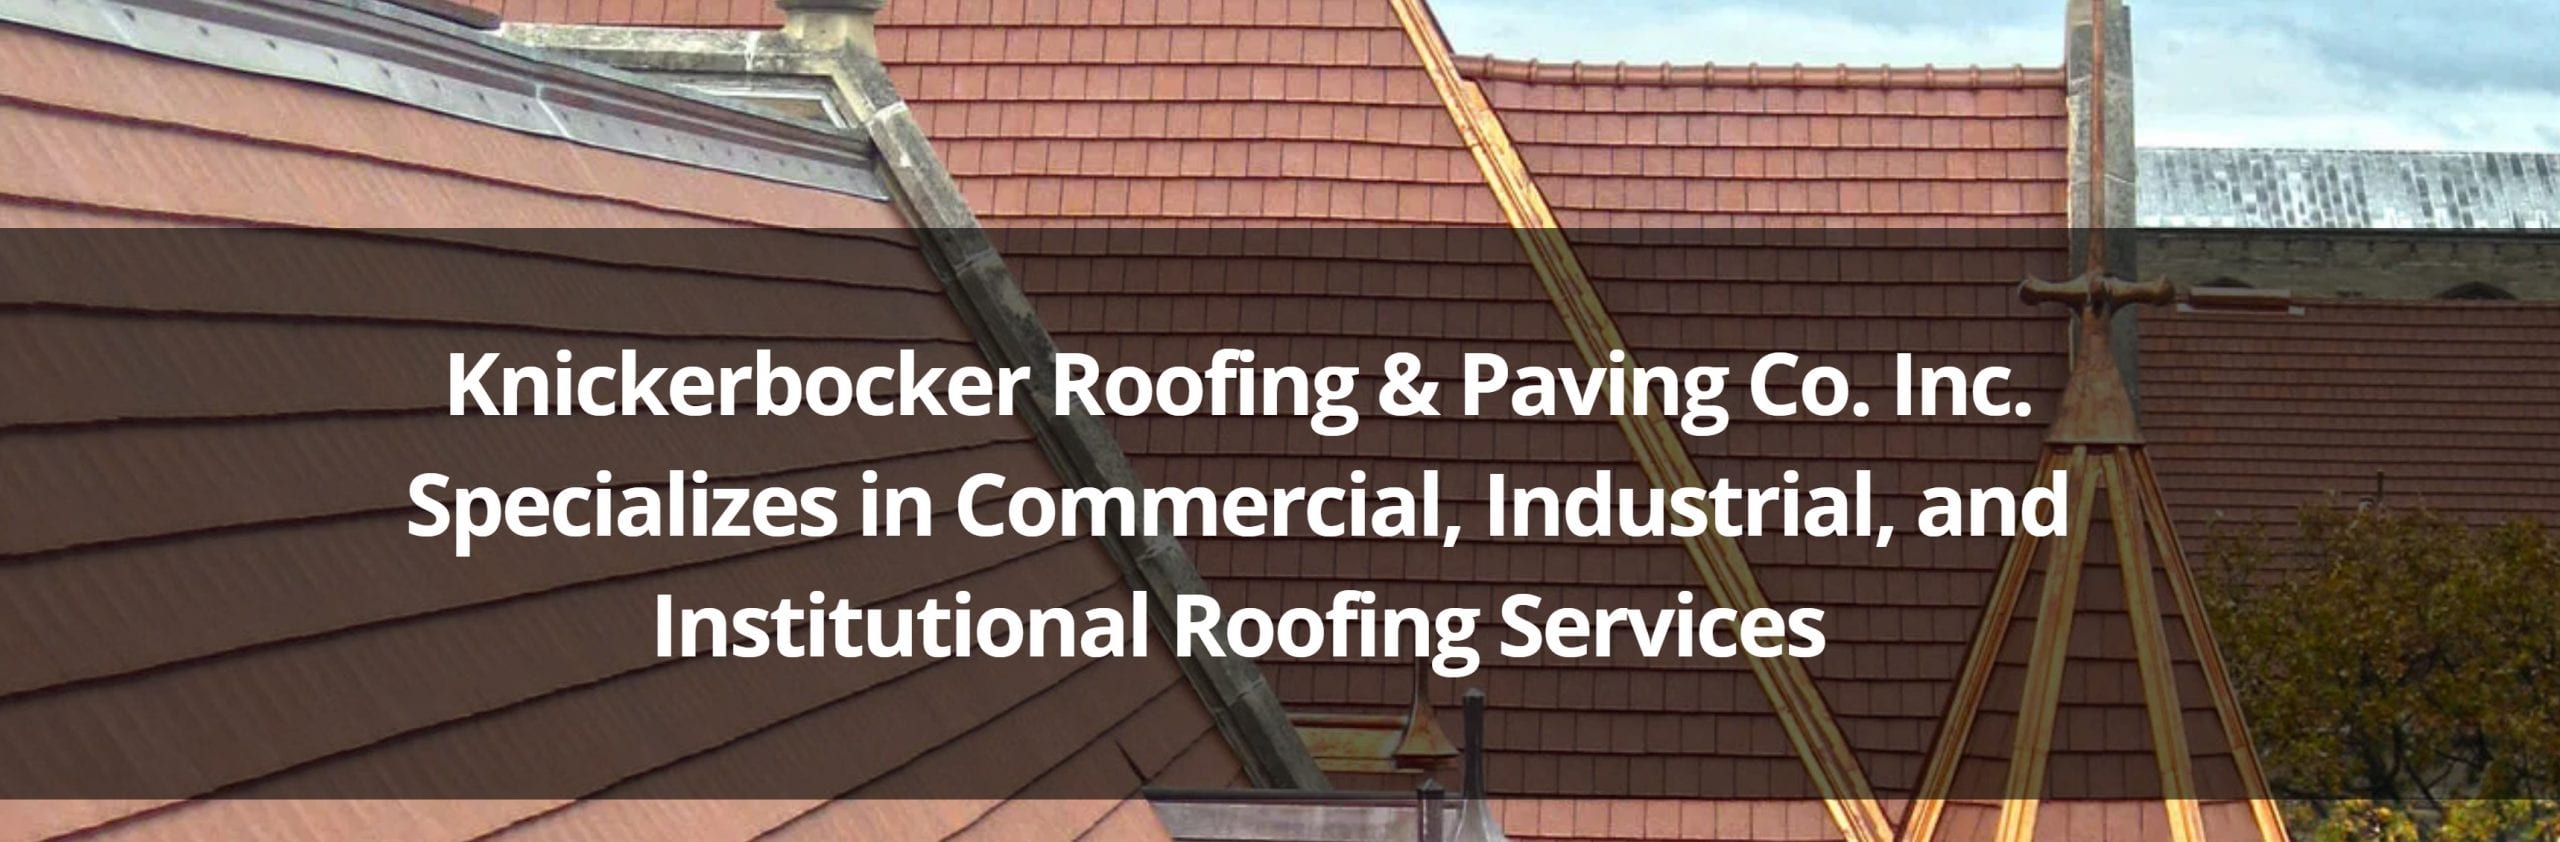 Knickerbocker Roofing and Paving Company